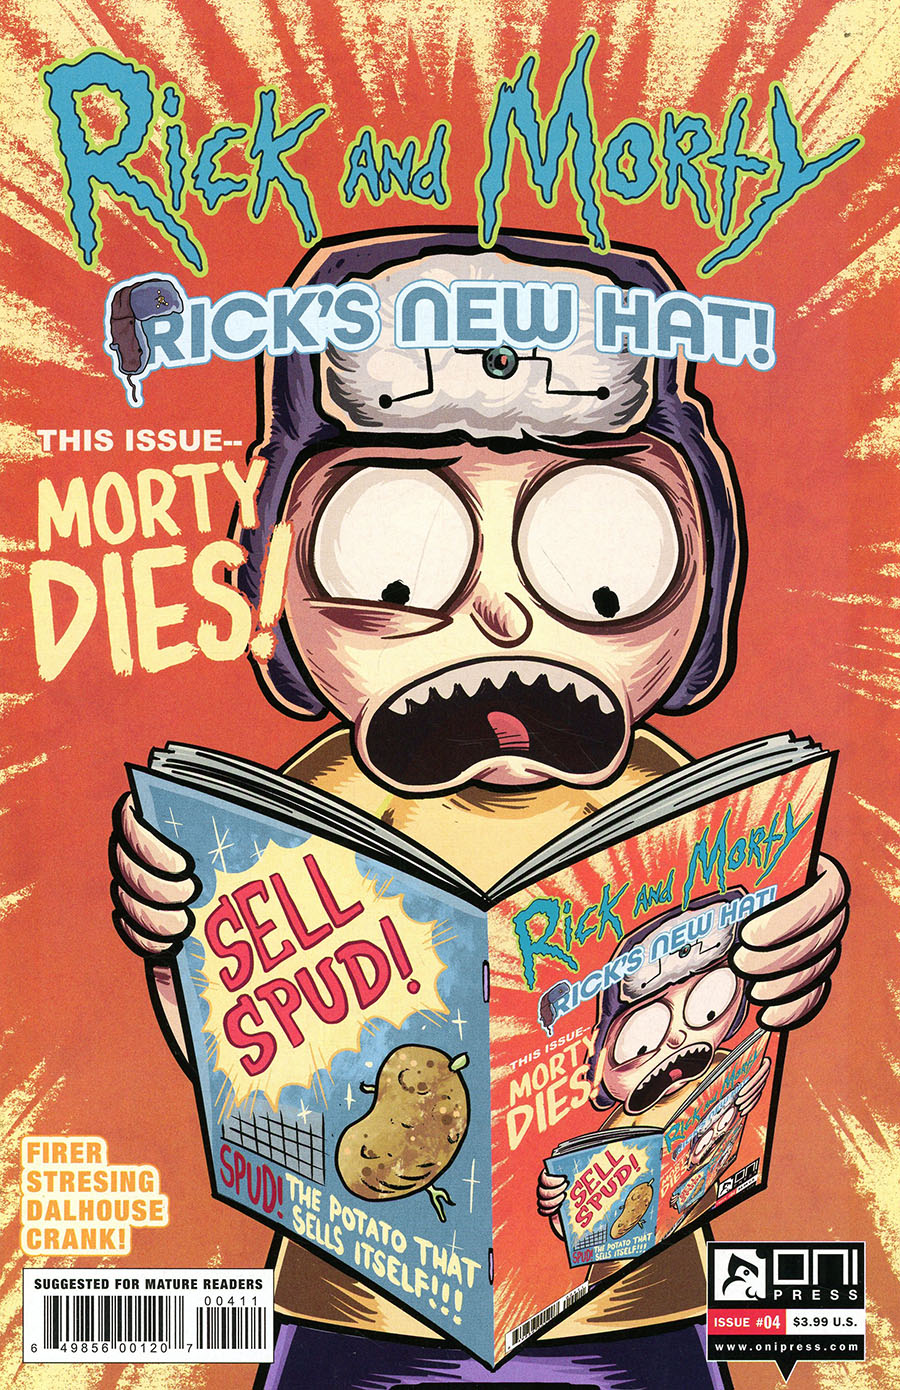 Rick And Morty Ricks New Hat #4 Cover A Regular Fred C Stresing Cover